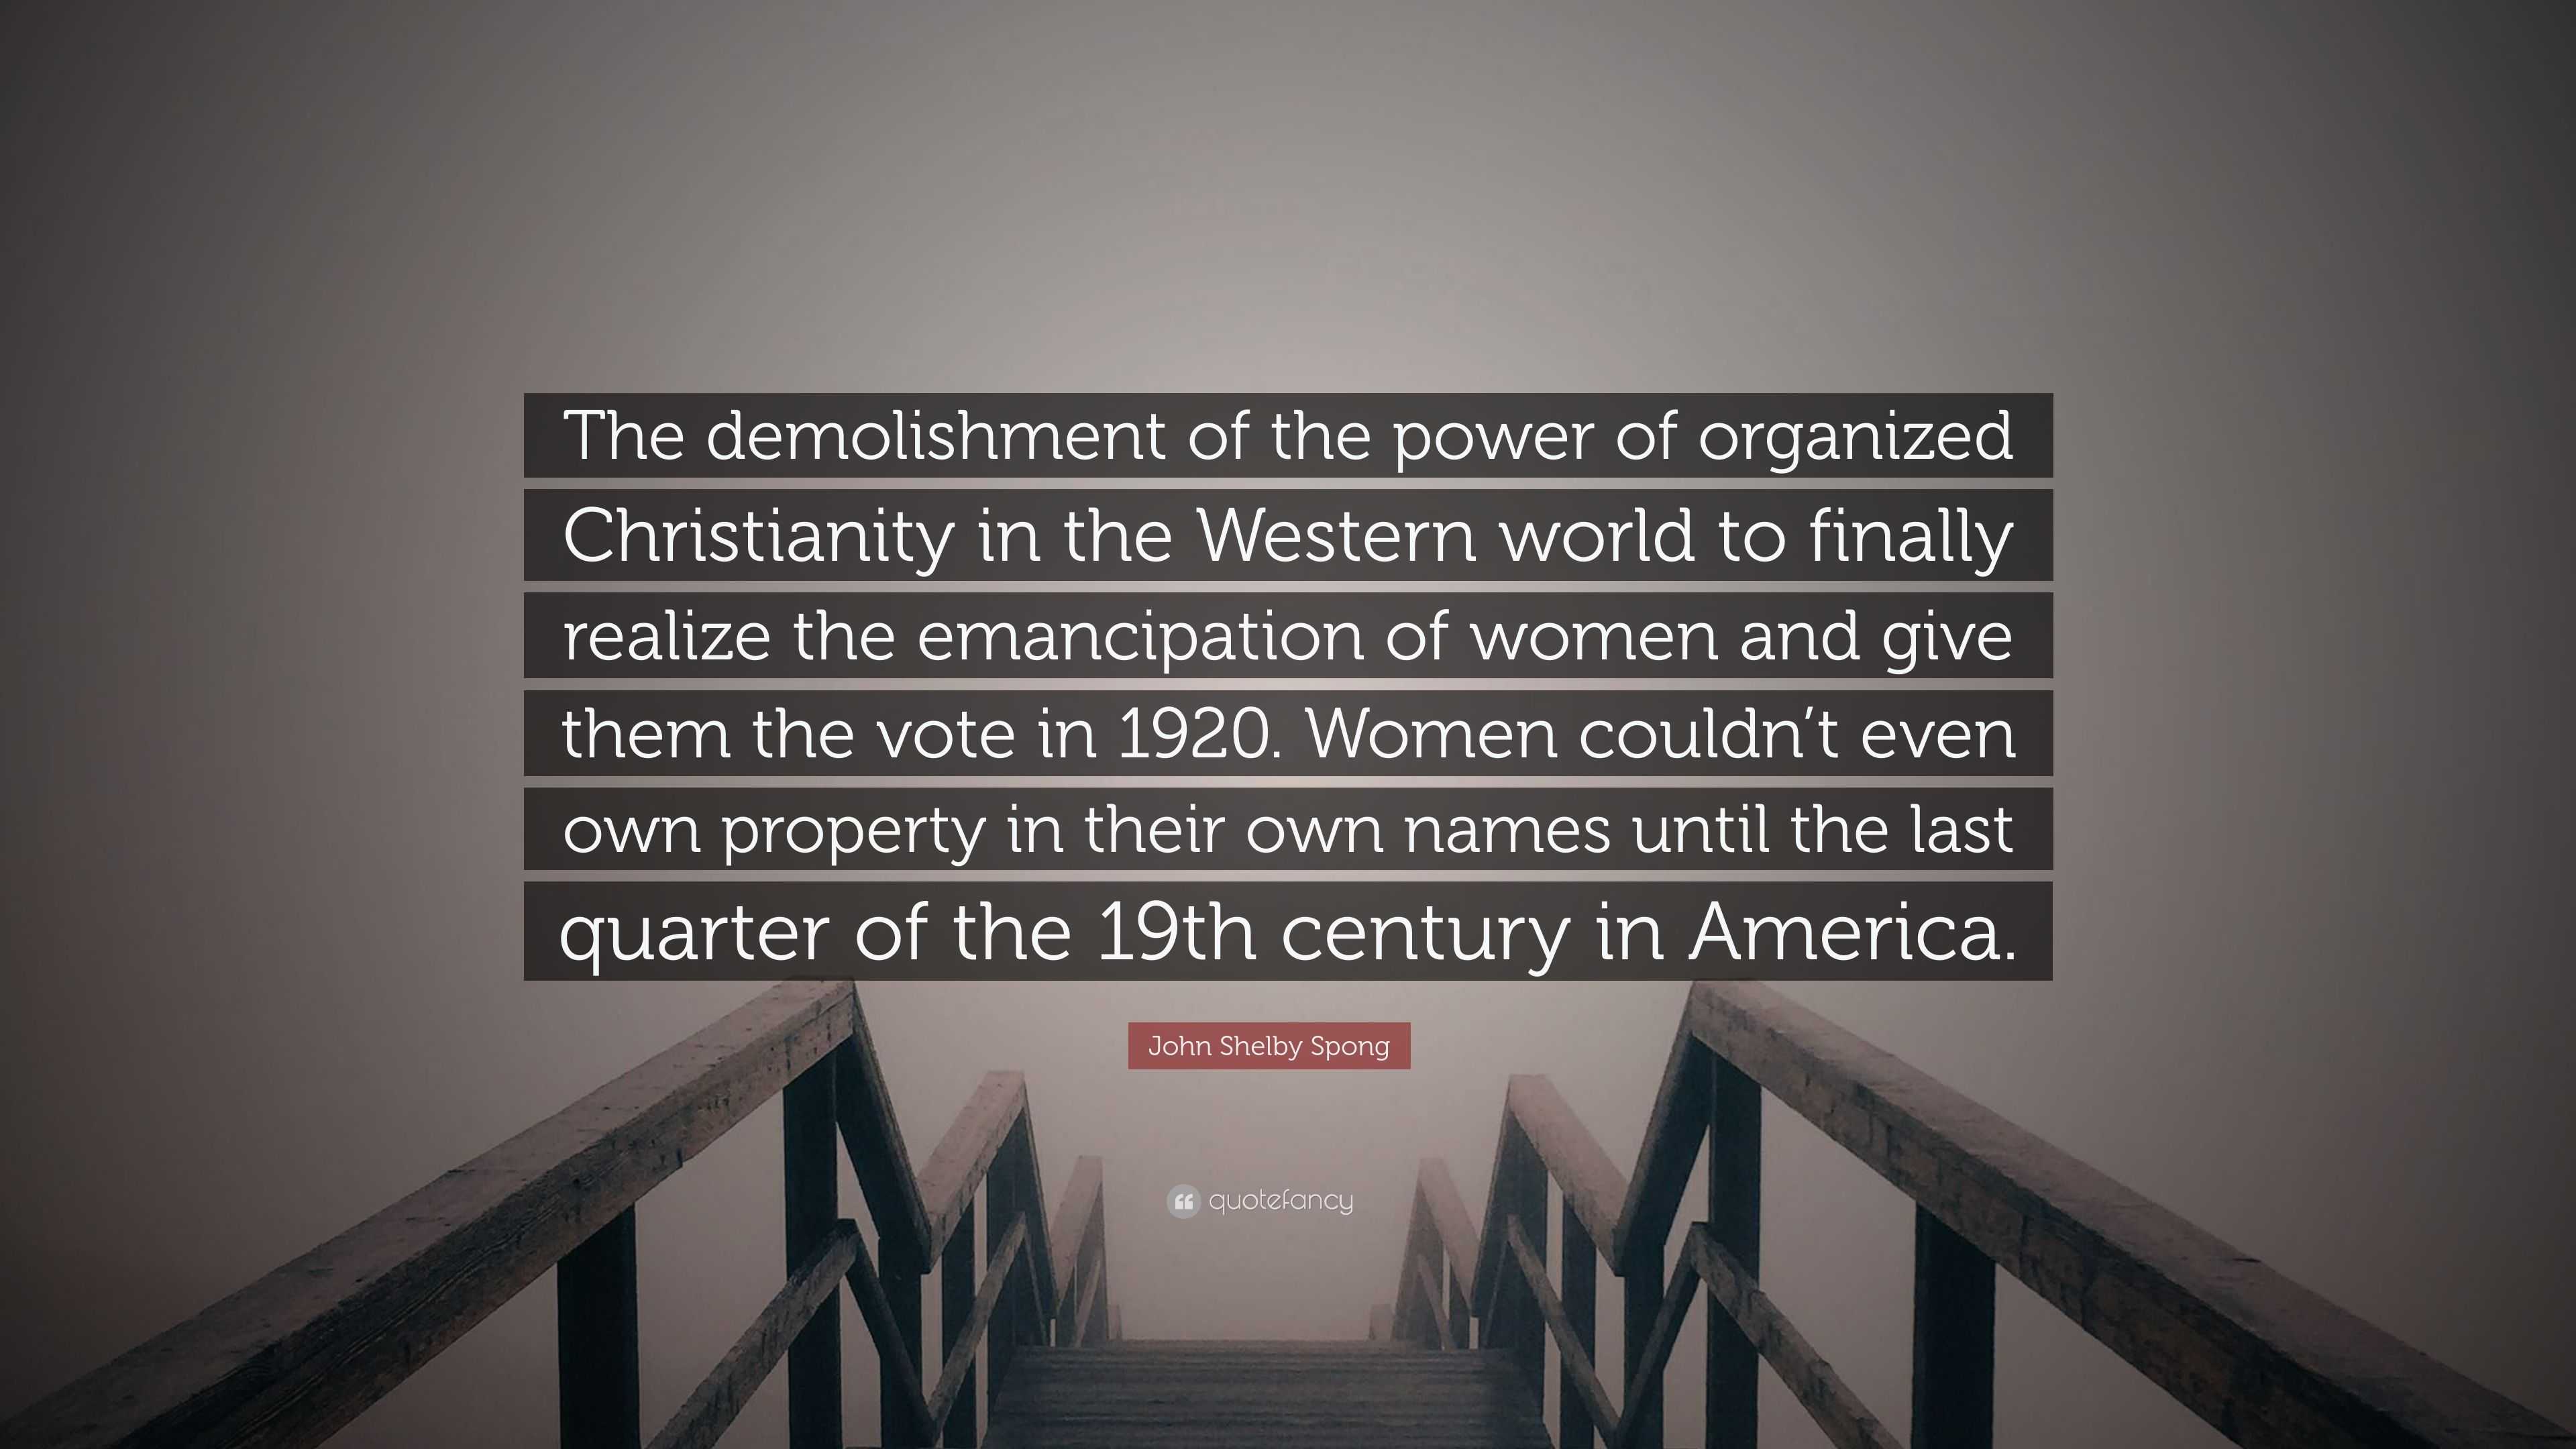 John Shelby Spong Quote: “The demolishment of the power of organized  Christianity in the Western world to finally realize the emancipation of  wome”